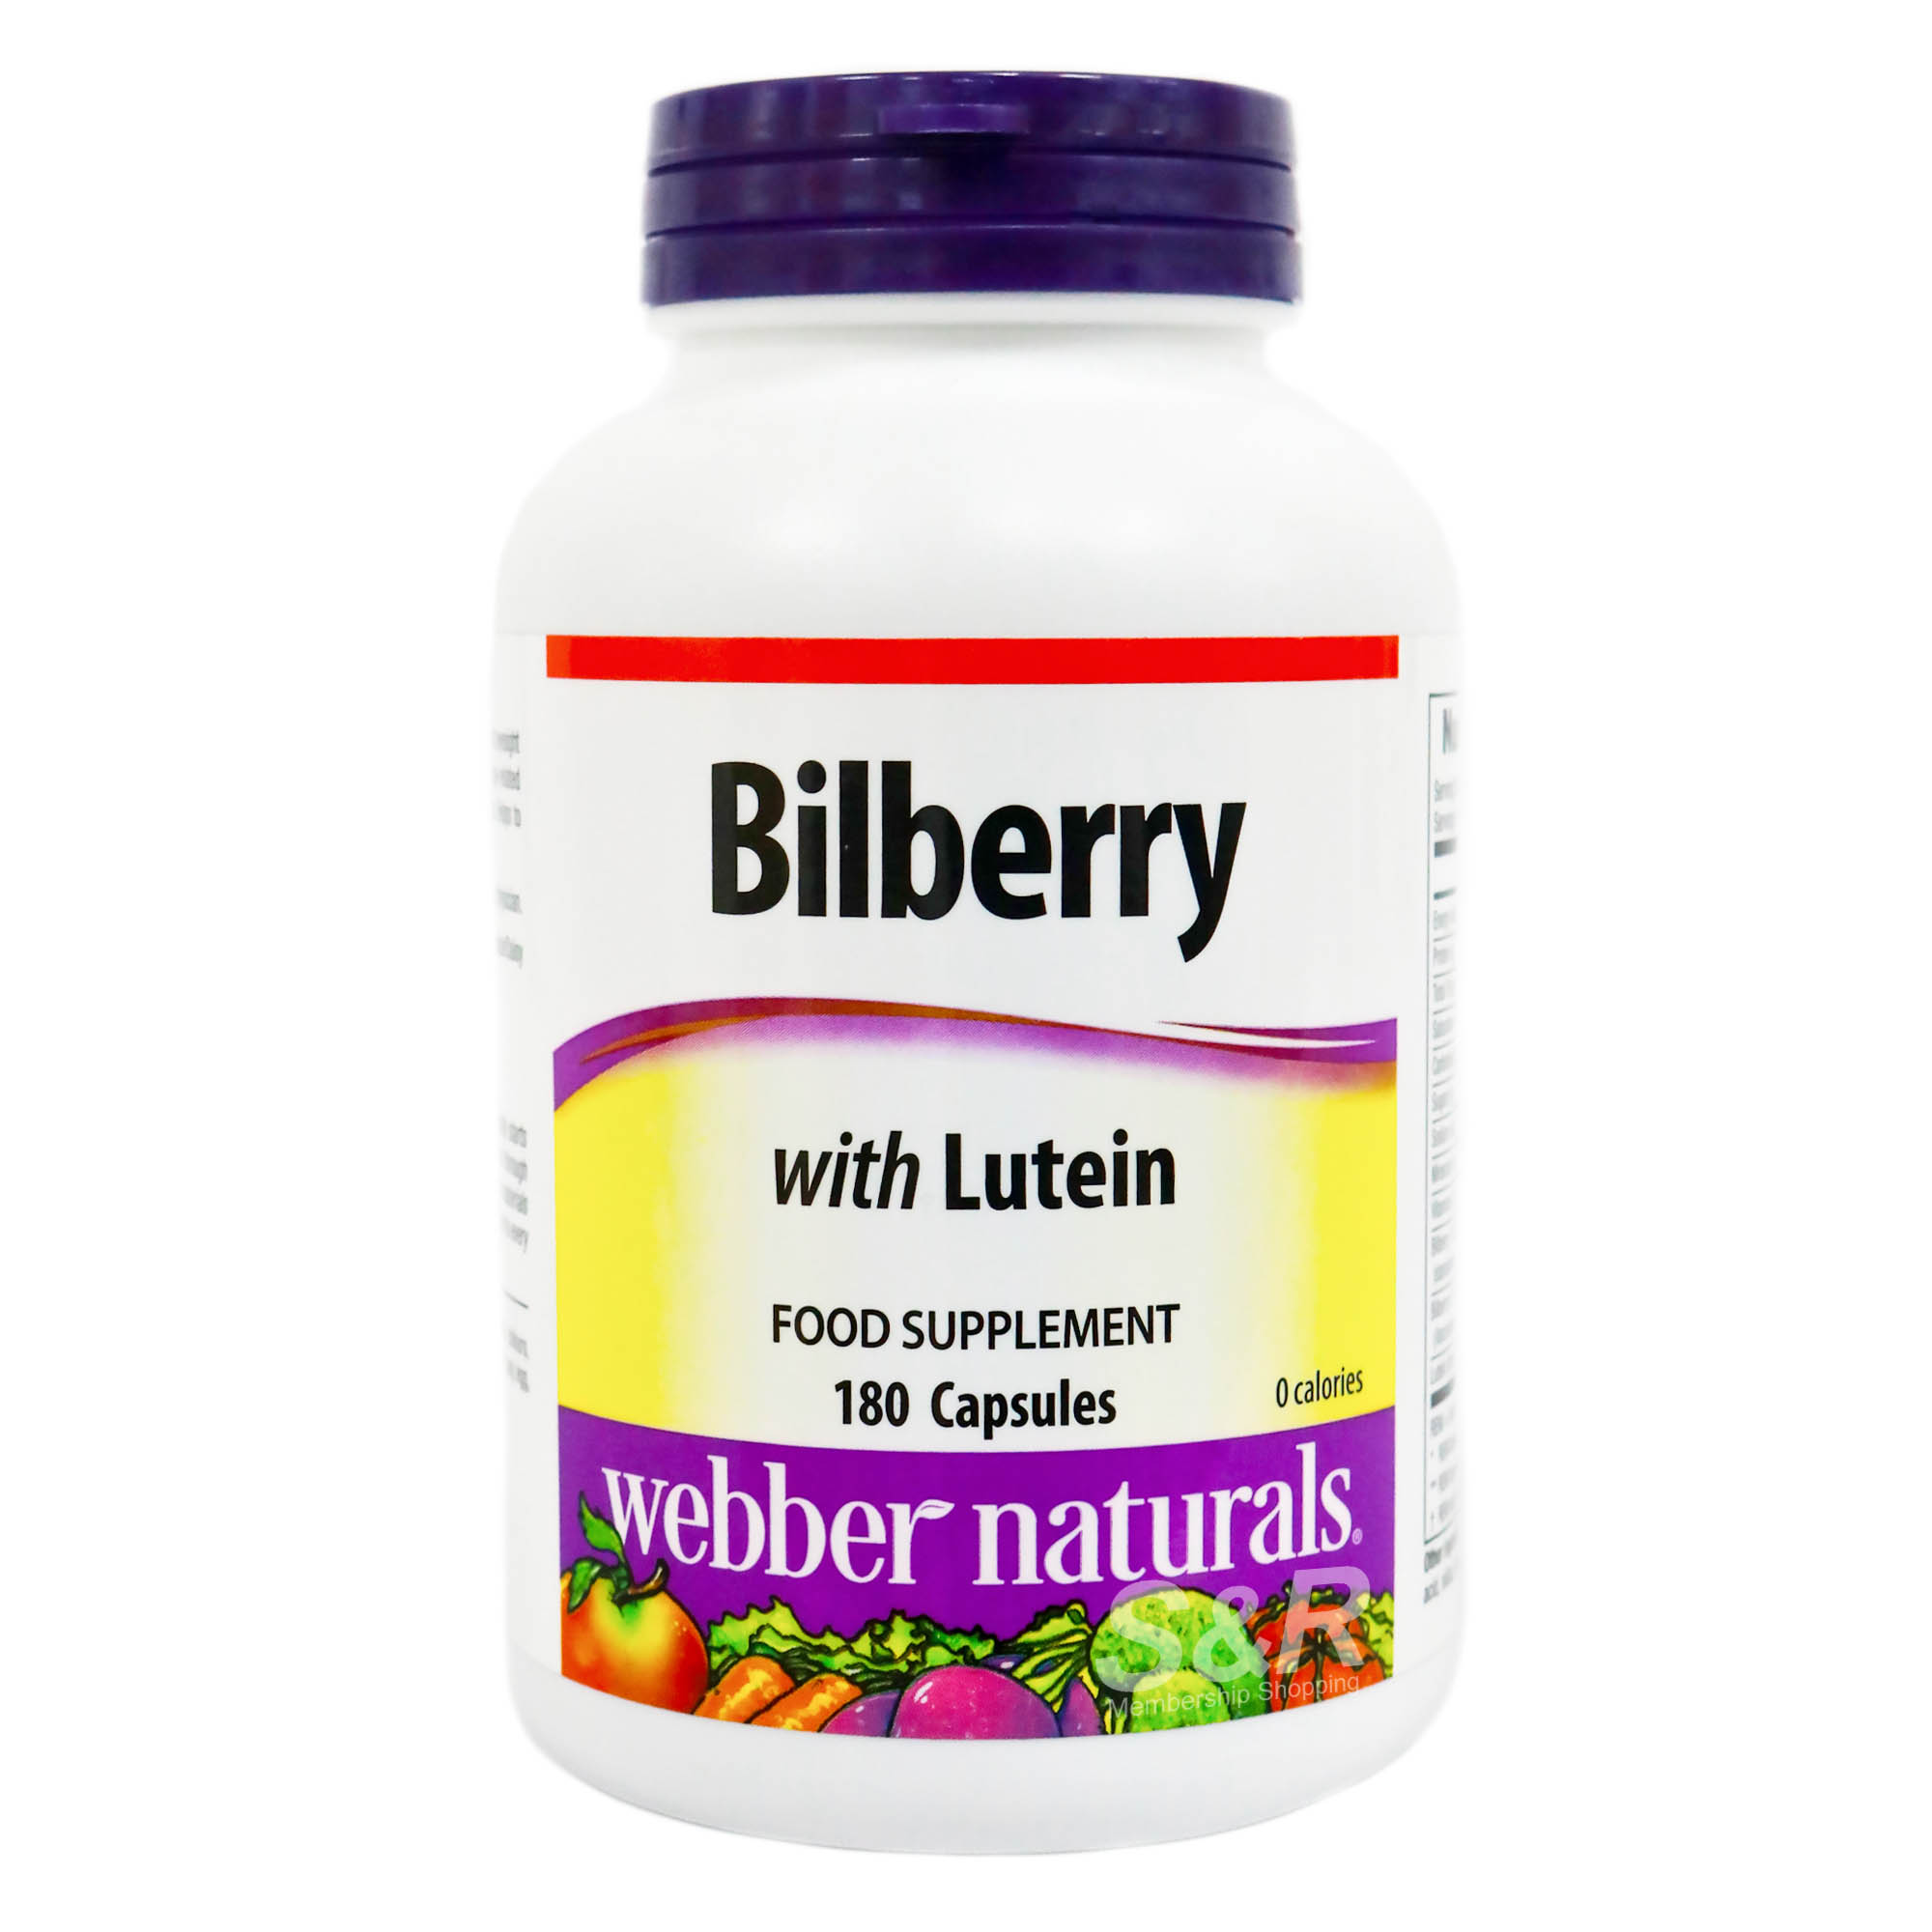 Webber Naturals Bilberry with Lutein 180 capsules